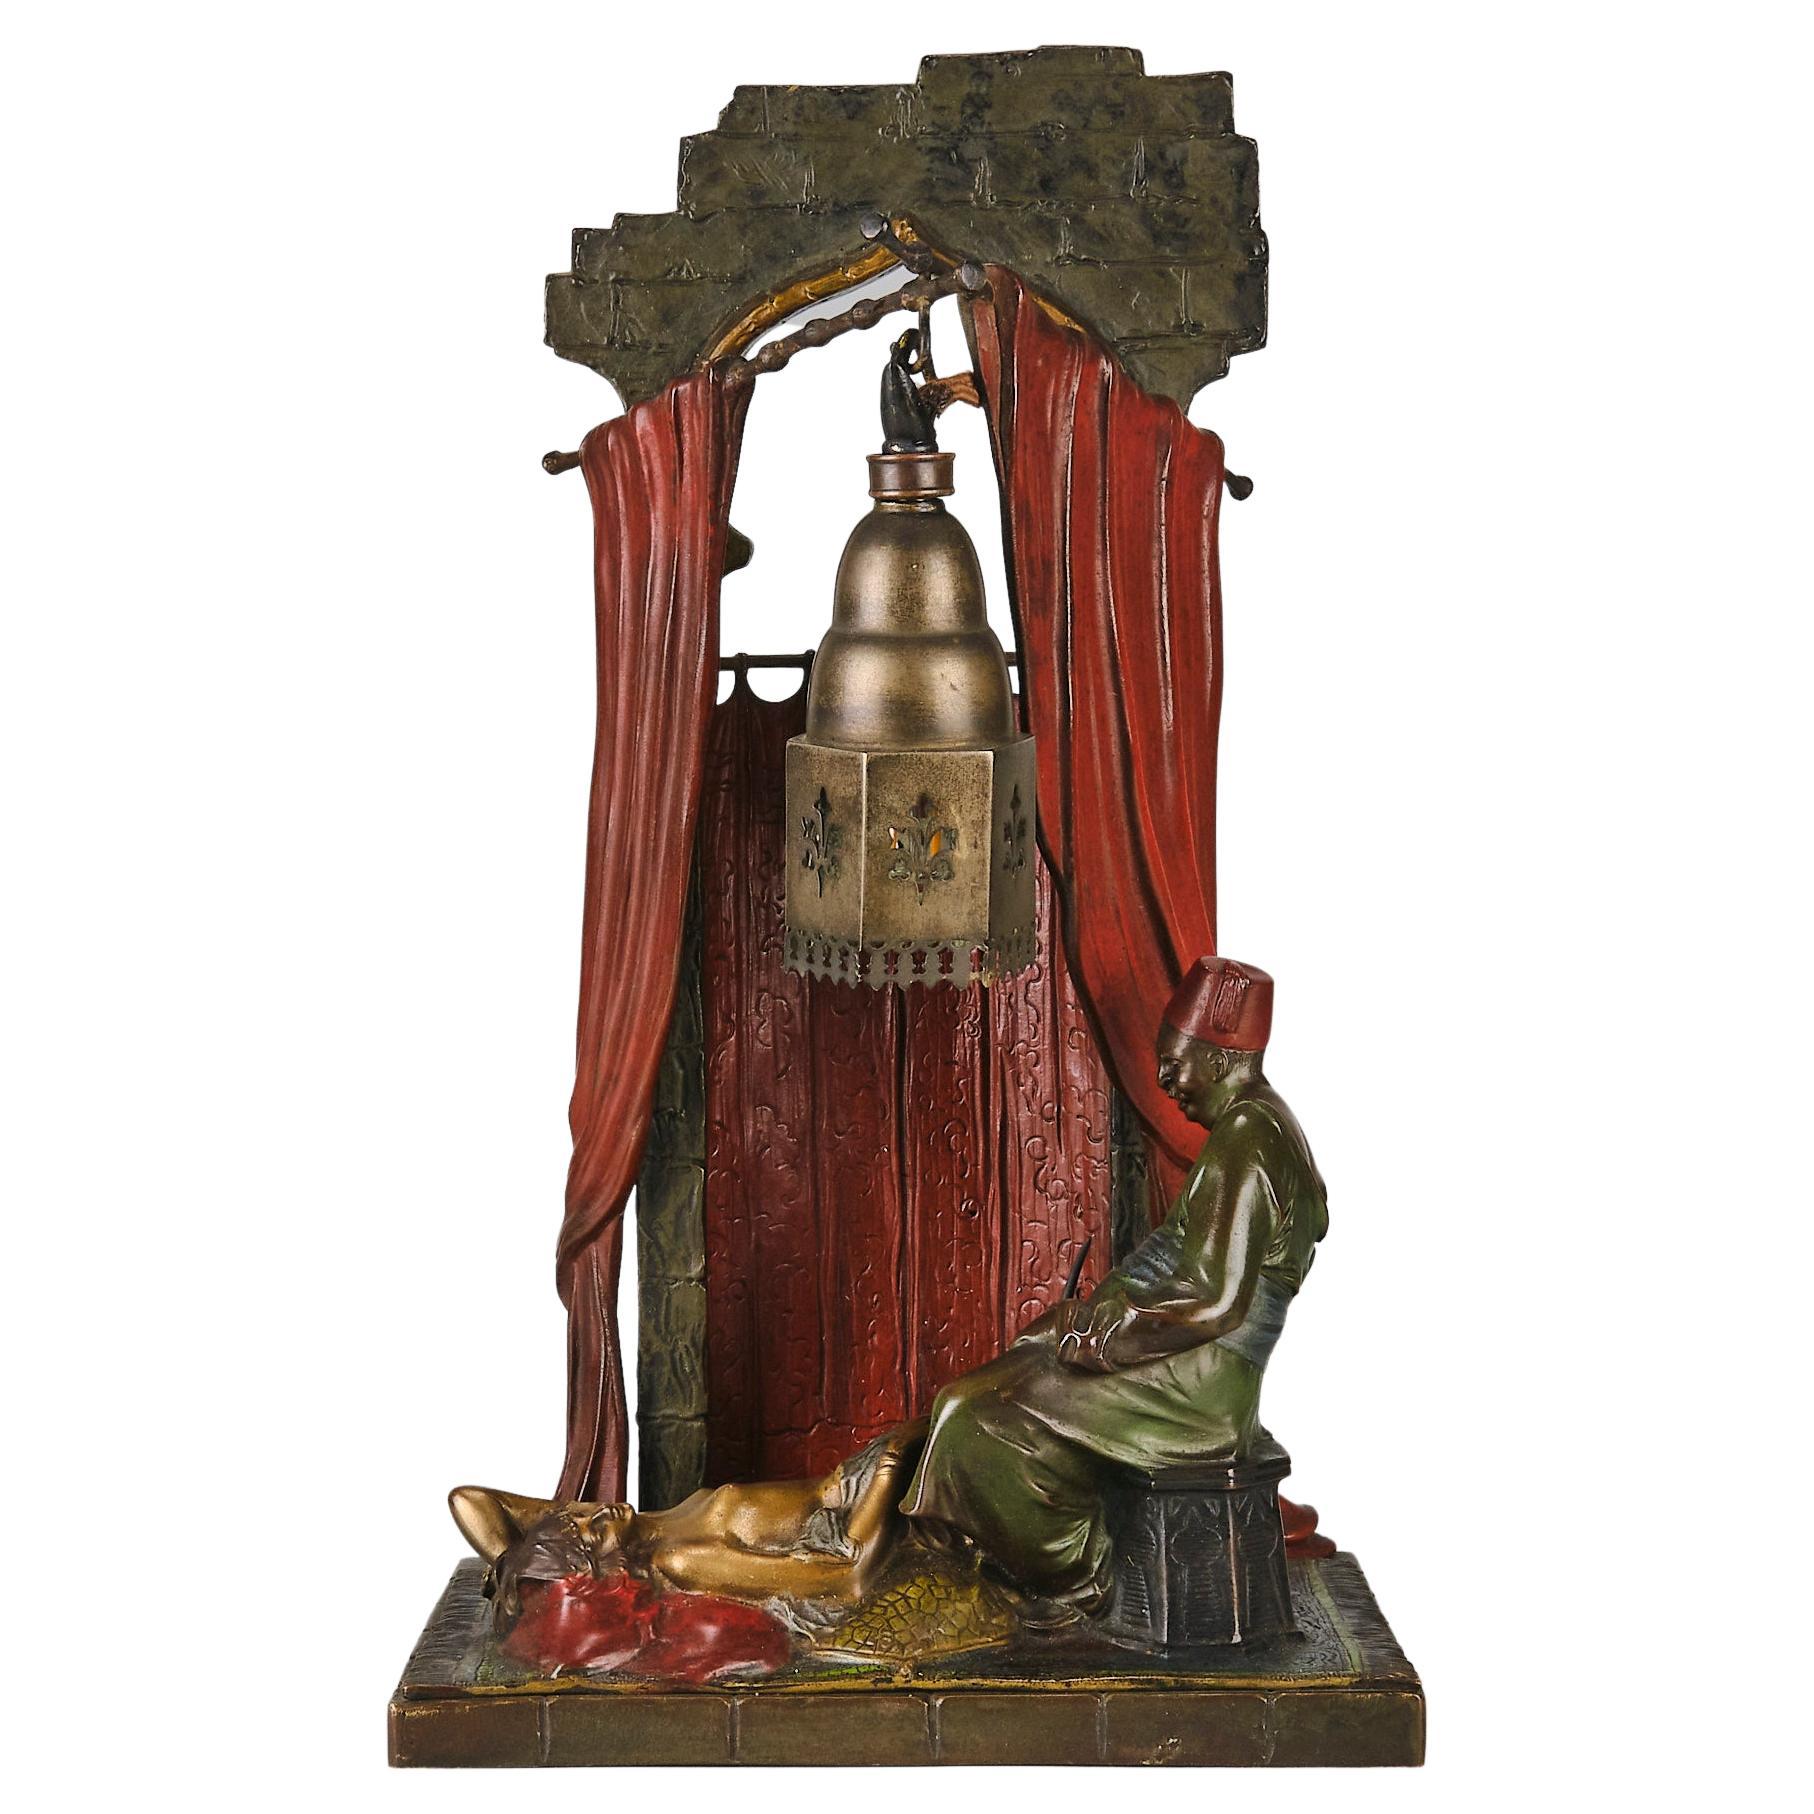  Early 20th Century Cold-Painted Bronze Entitled "Harem Lamp" by Bruno Zach For Sale